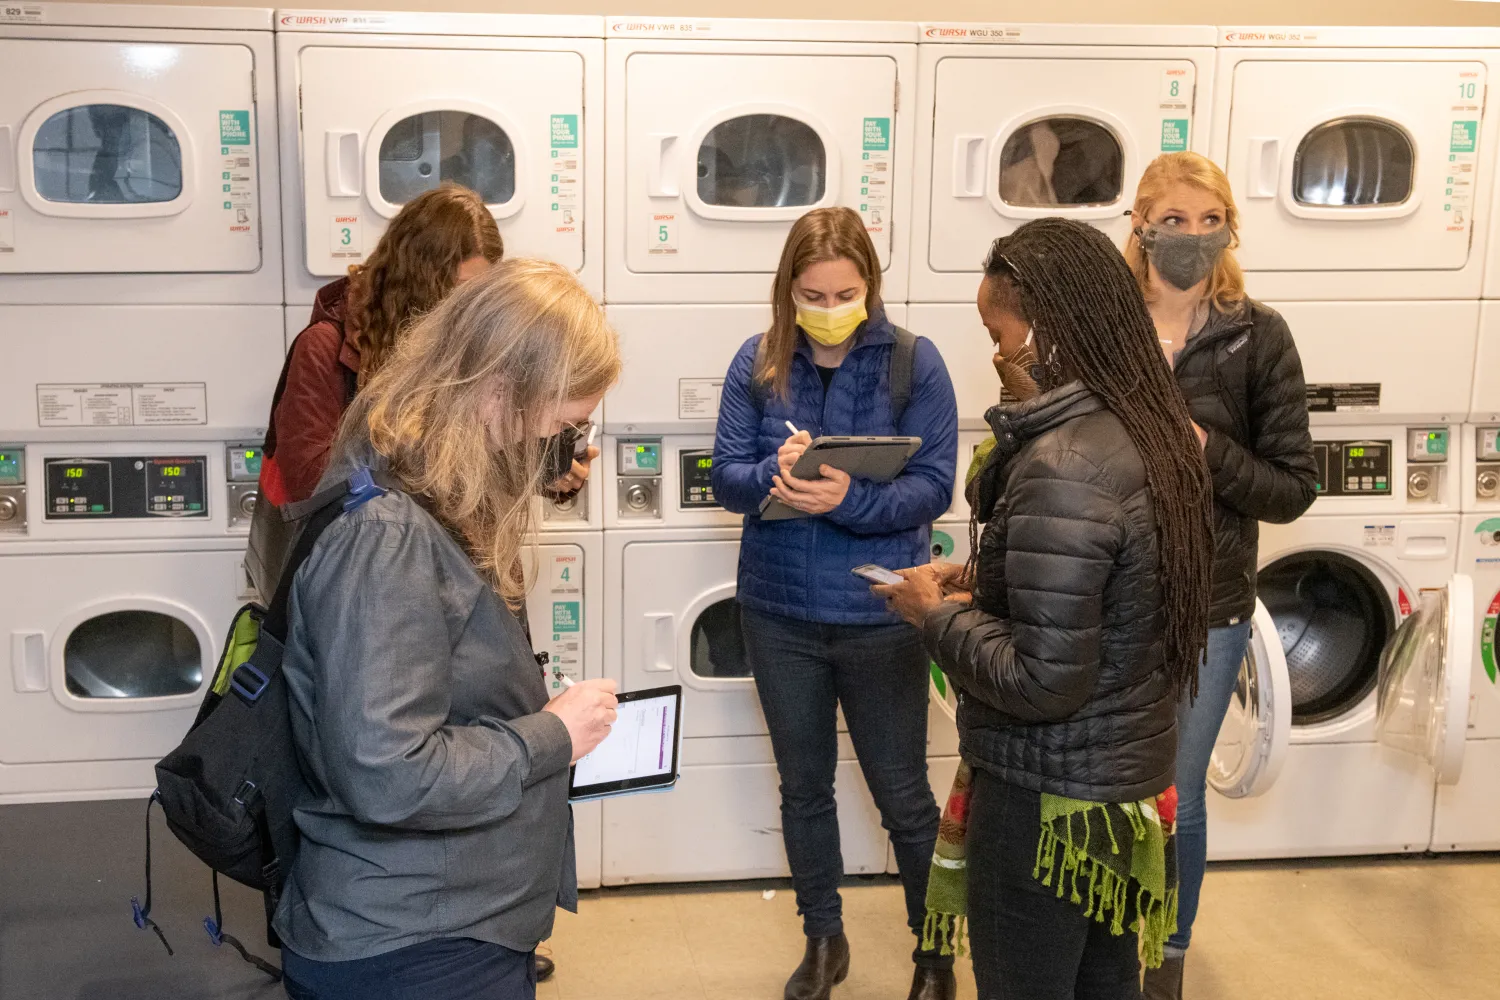 Principal Katie Ackerly and others standing and taking notes in the Laundry Room of a building.